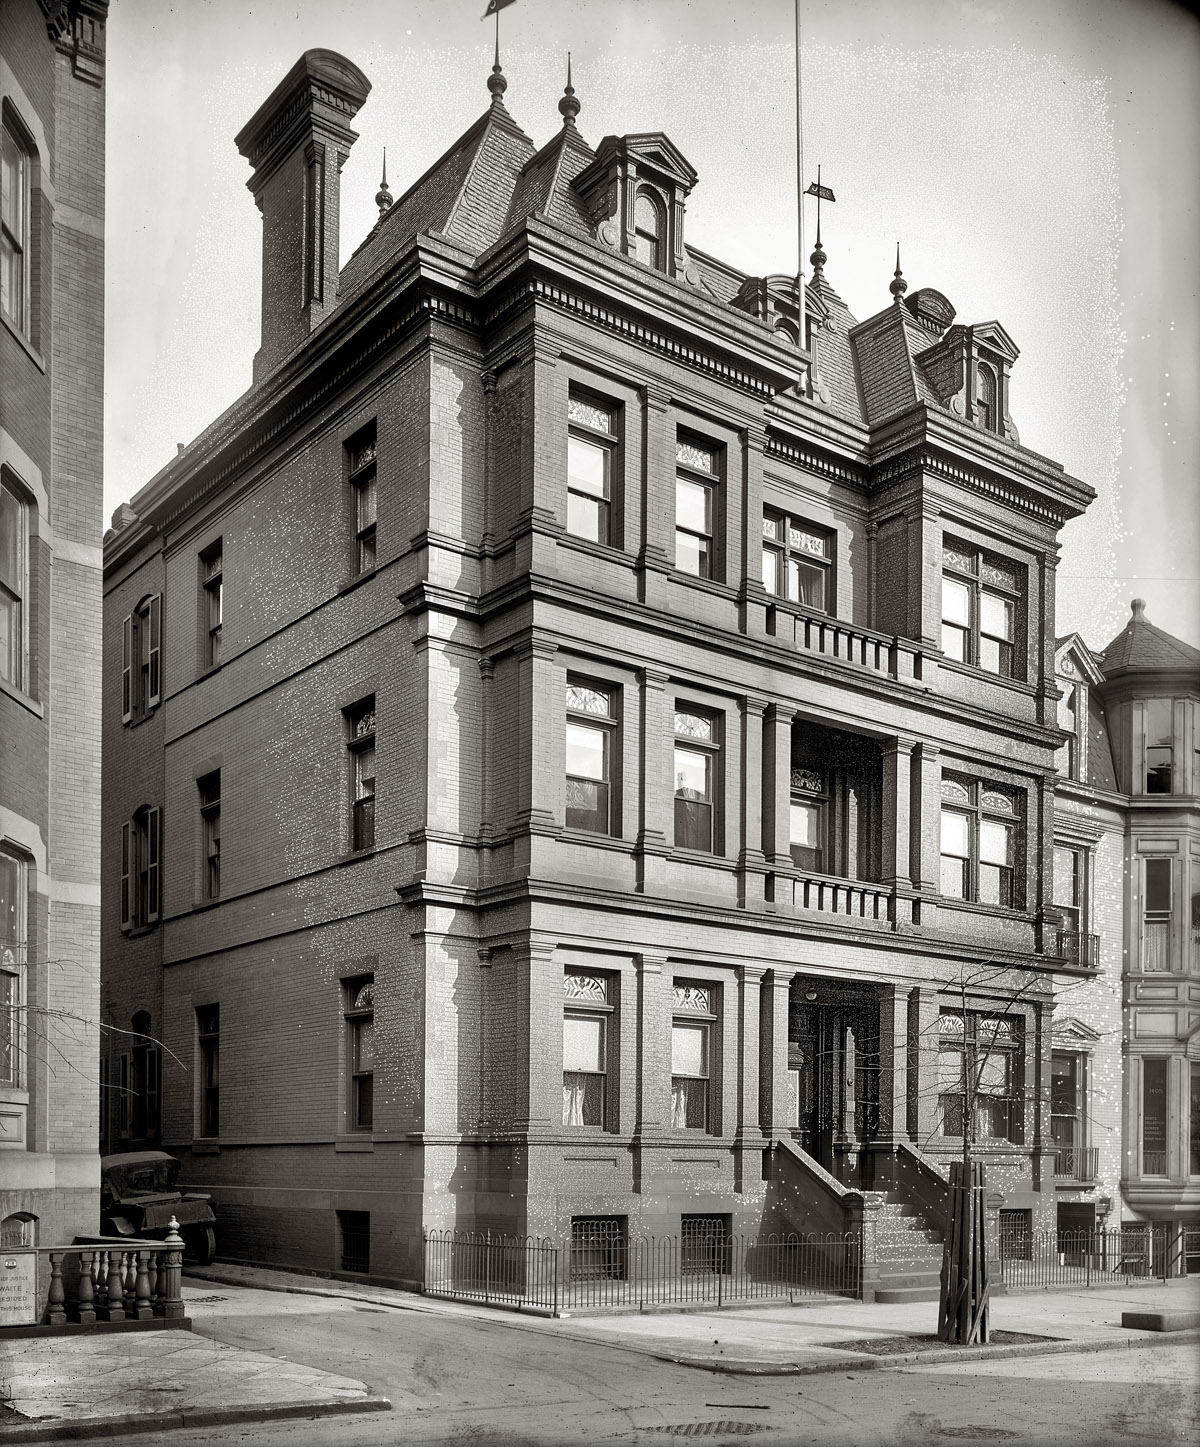 Washington circa 1920. "Mexican Embassy on Eye Street (moved)." A substantial looking edifice with a bit of a mold problem. View full size. National Photo Co.